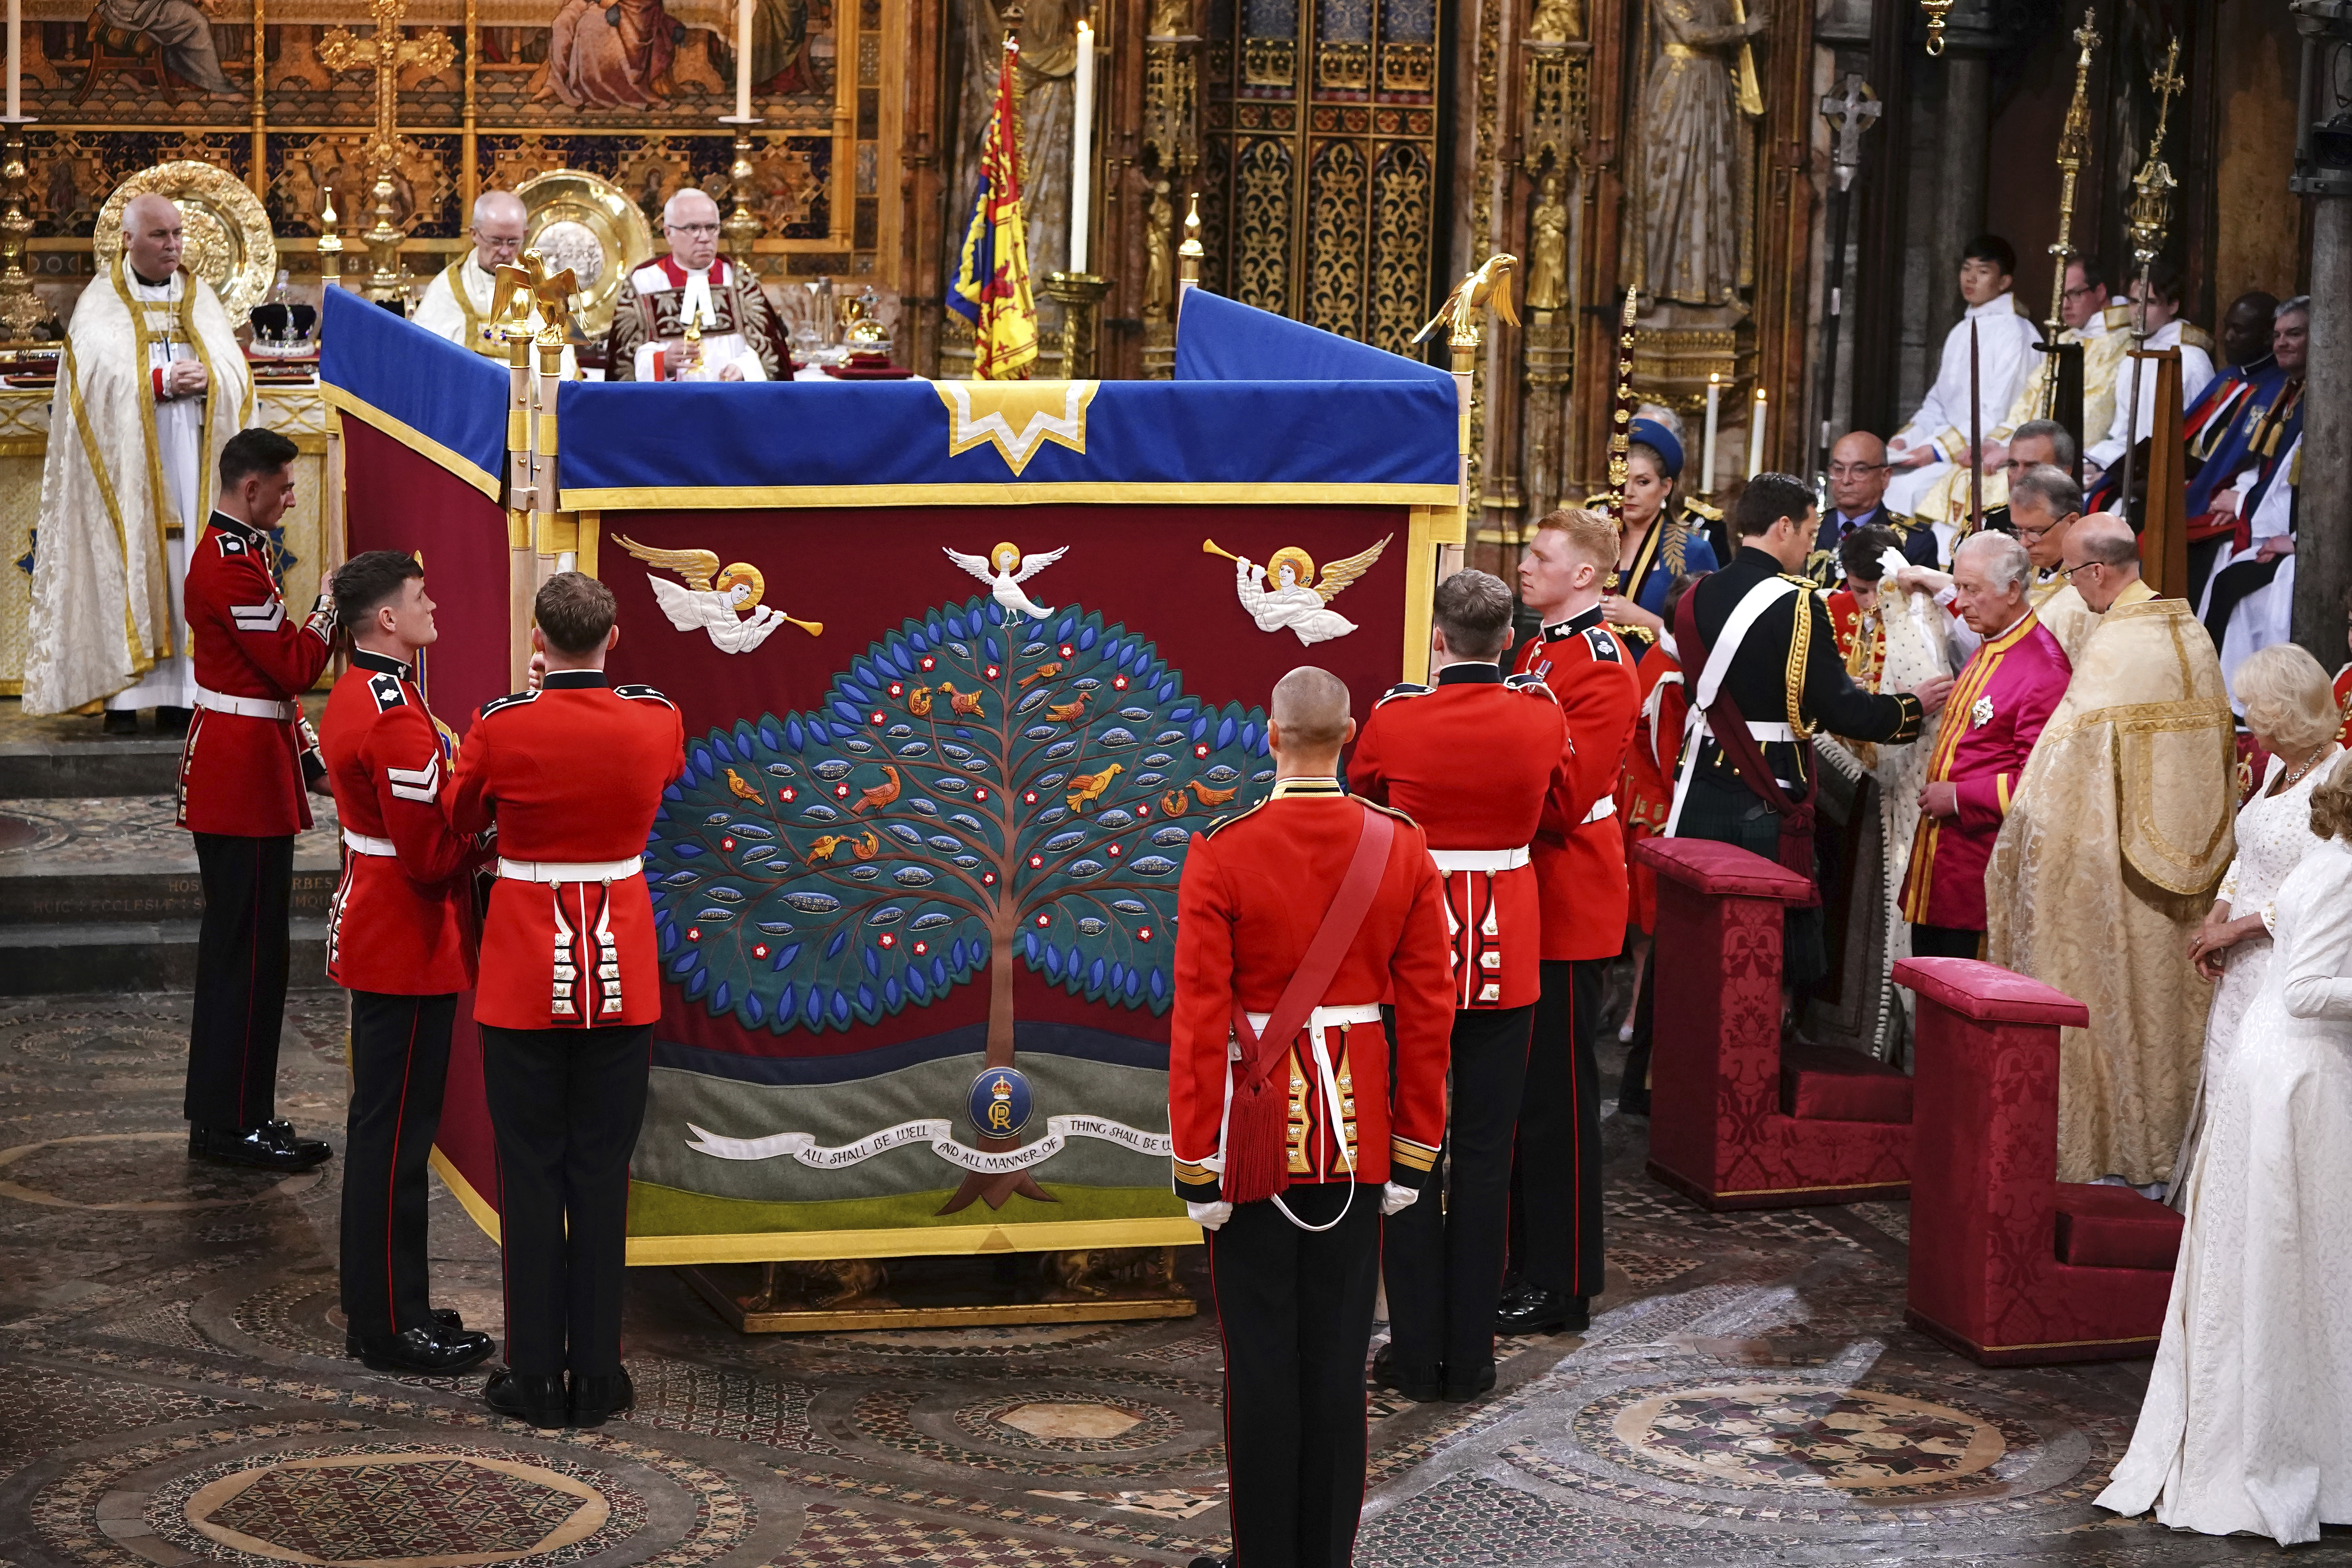 An anointing screen is erected for King Charles III during his coronation ceremony in Westminster Abbey in London on Saturday.